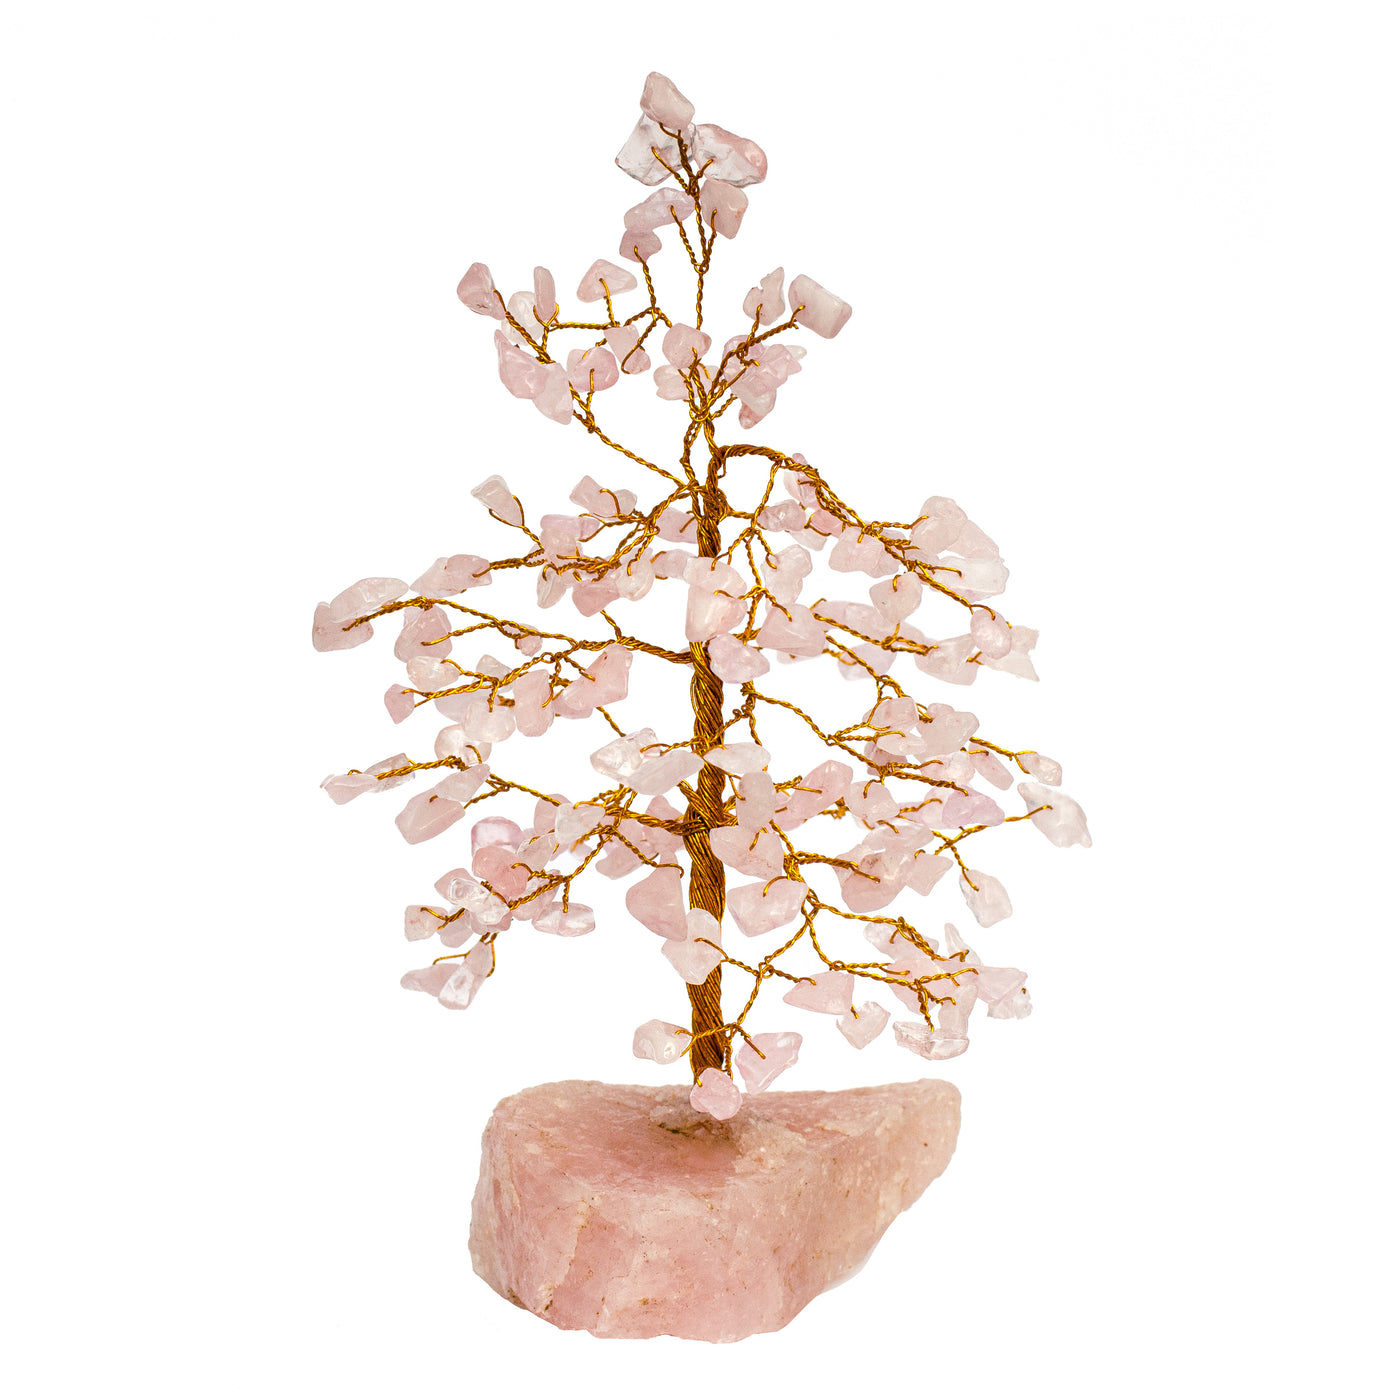 Rose Quartz Tree | Unique Sympathy Gifts For Loss – Healing Hearts Journey